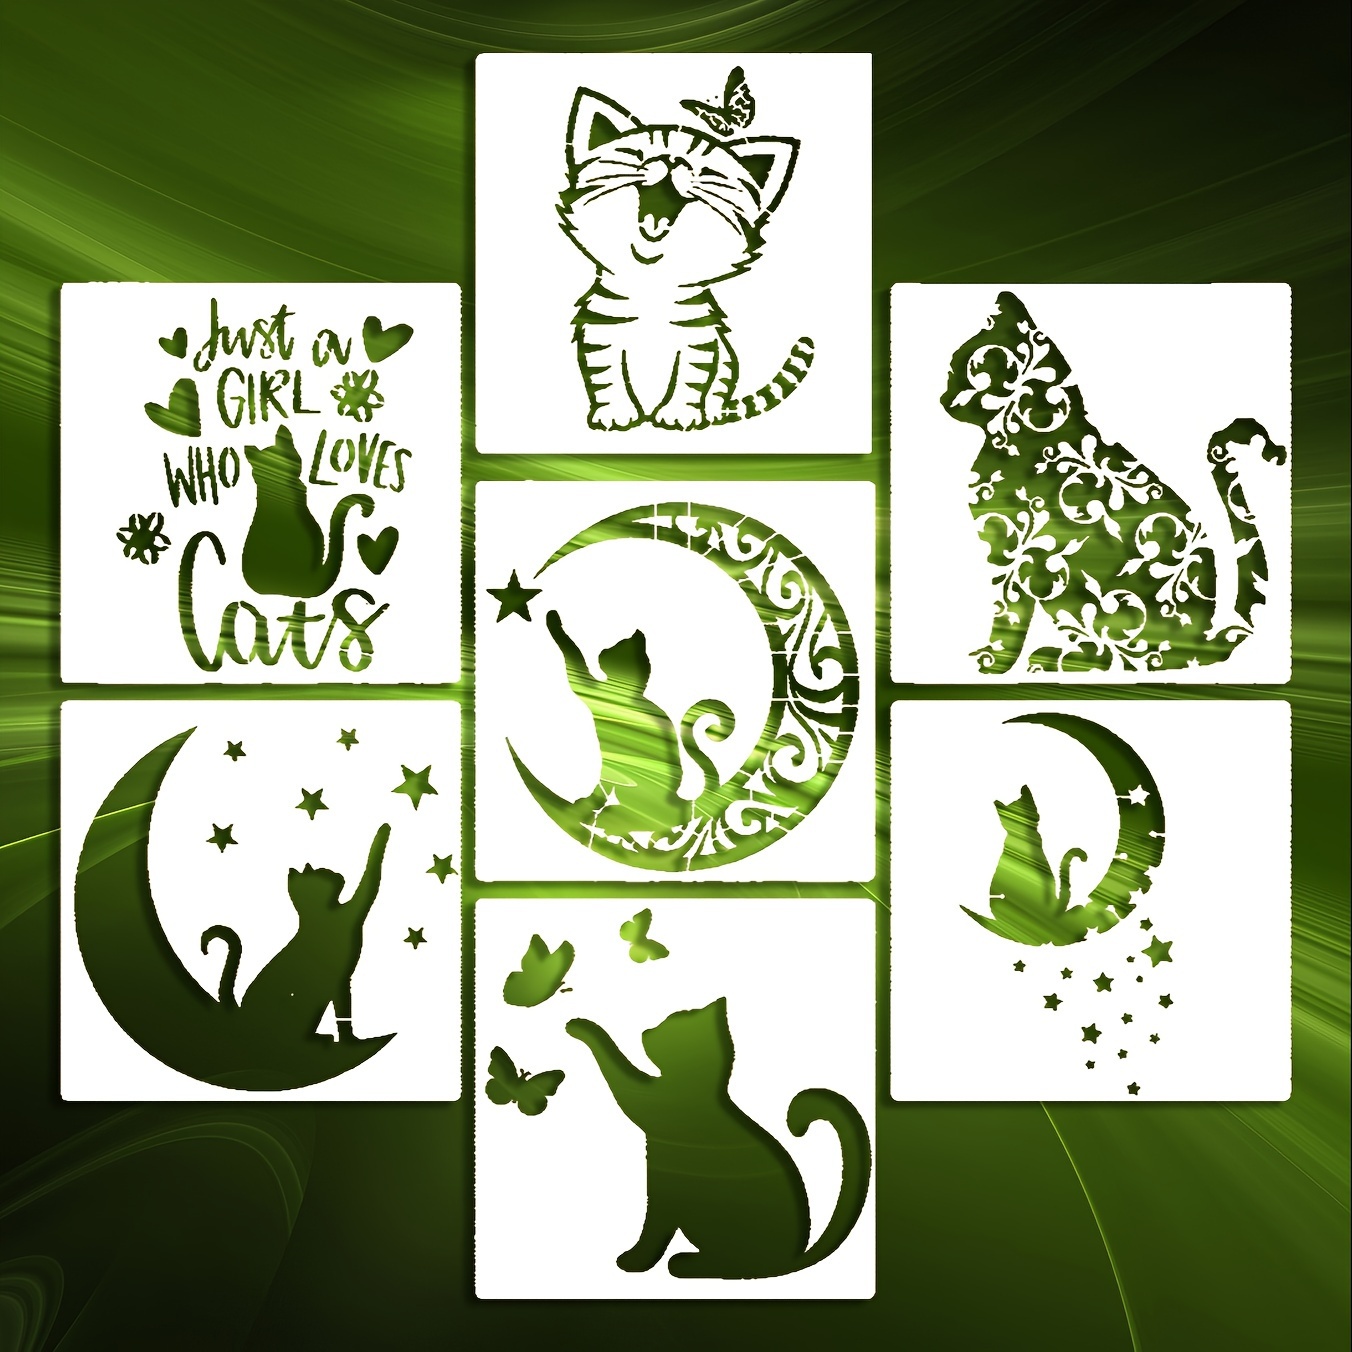 Cat Theme Stencils For Painting A4 Size Pet Hollow - Temu